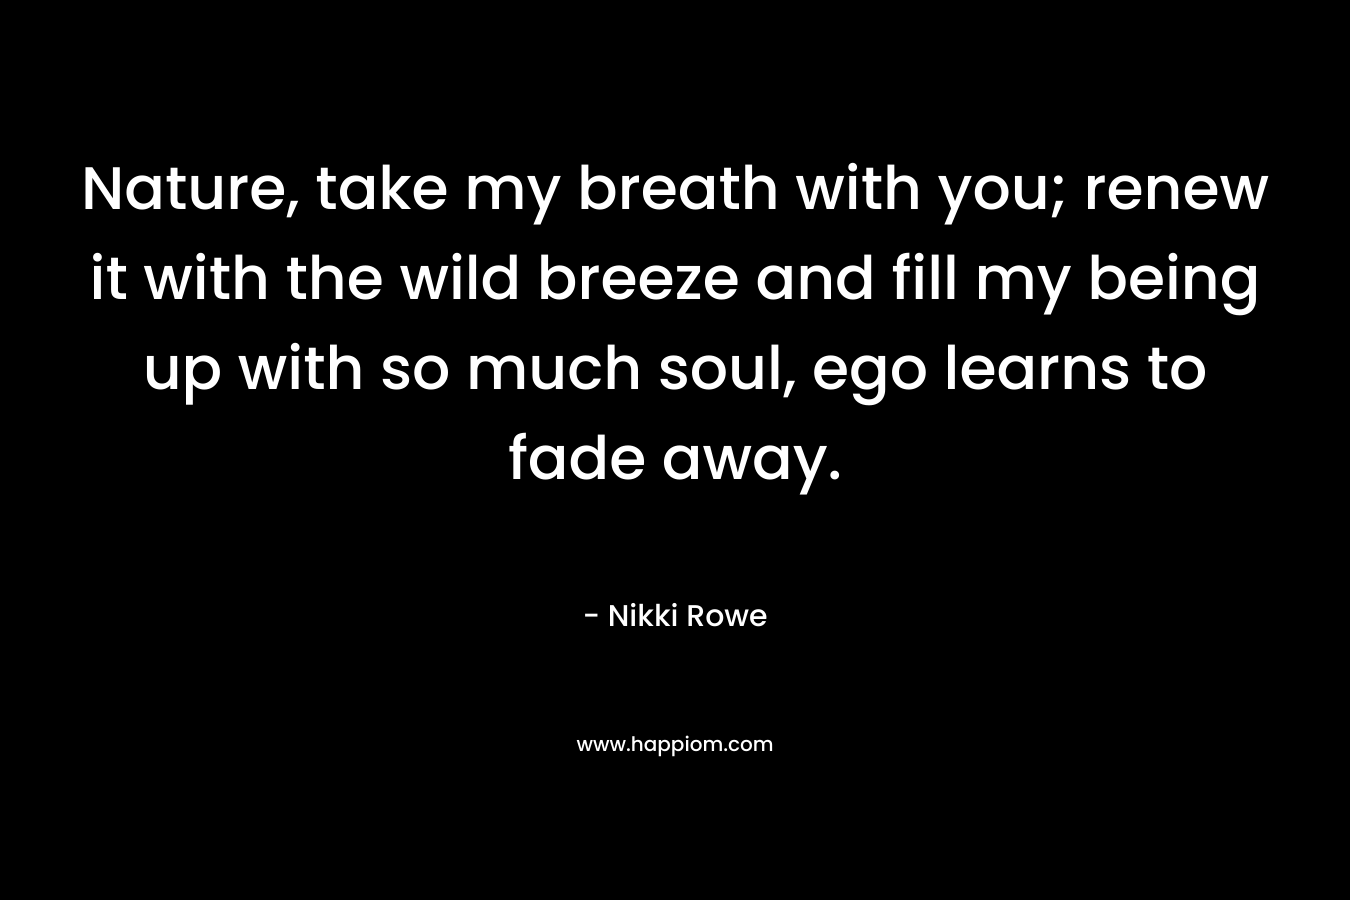 Nature, take my breath with you; renew it with the wild breeze and fill my being up with so much soul, ego learns to fade away.